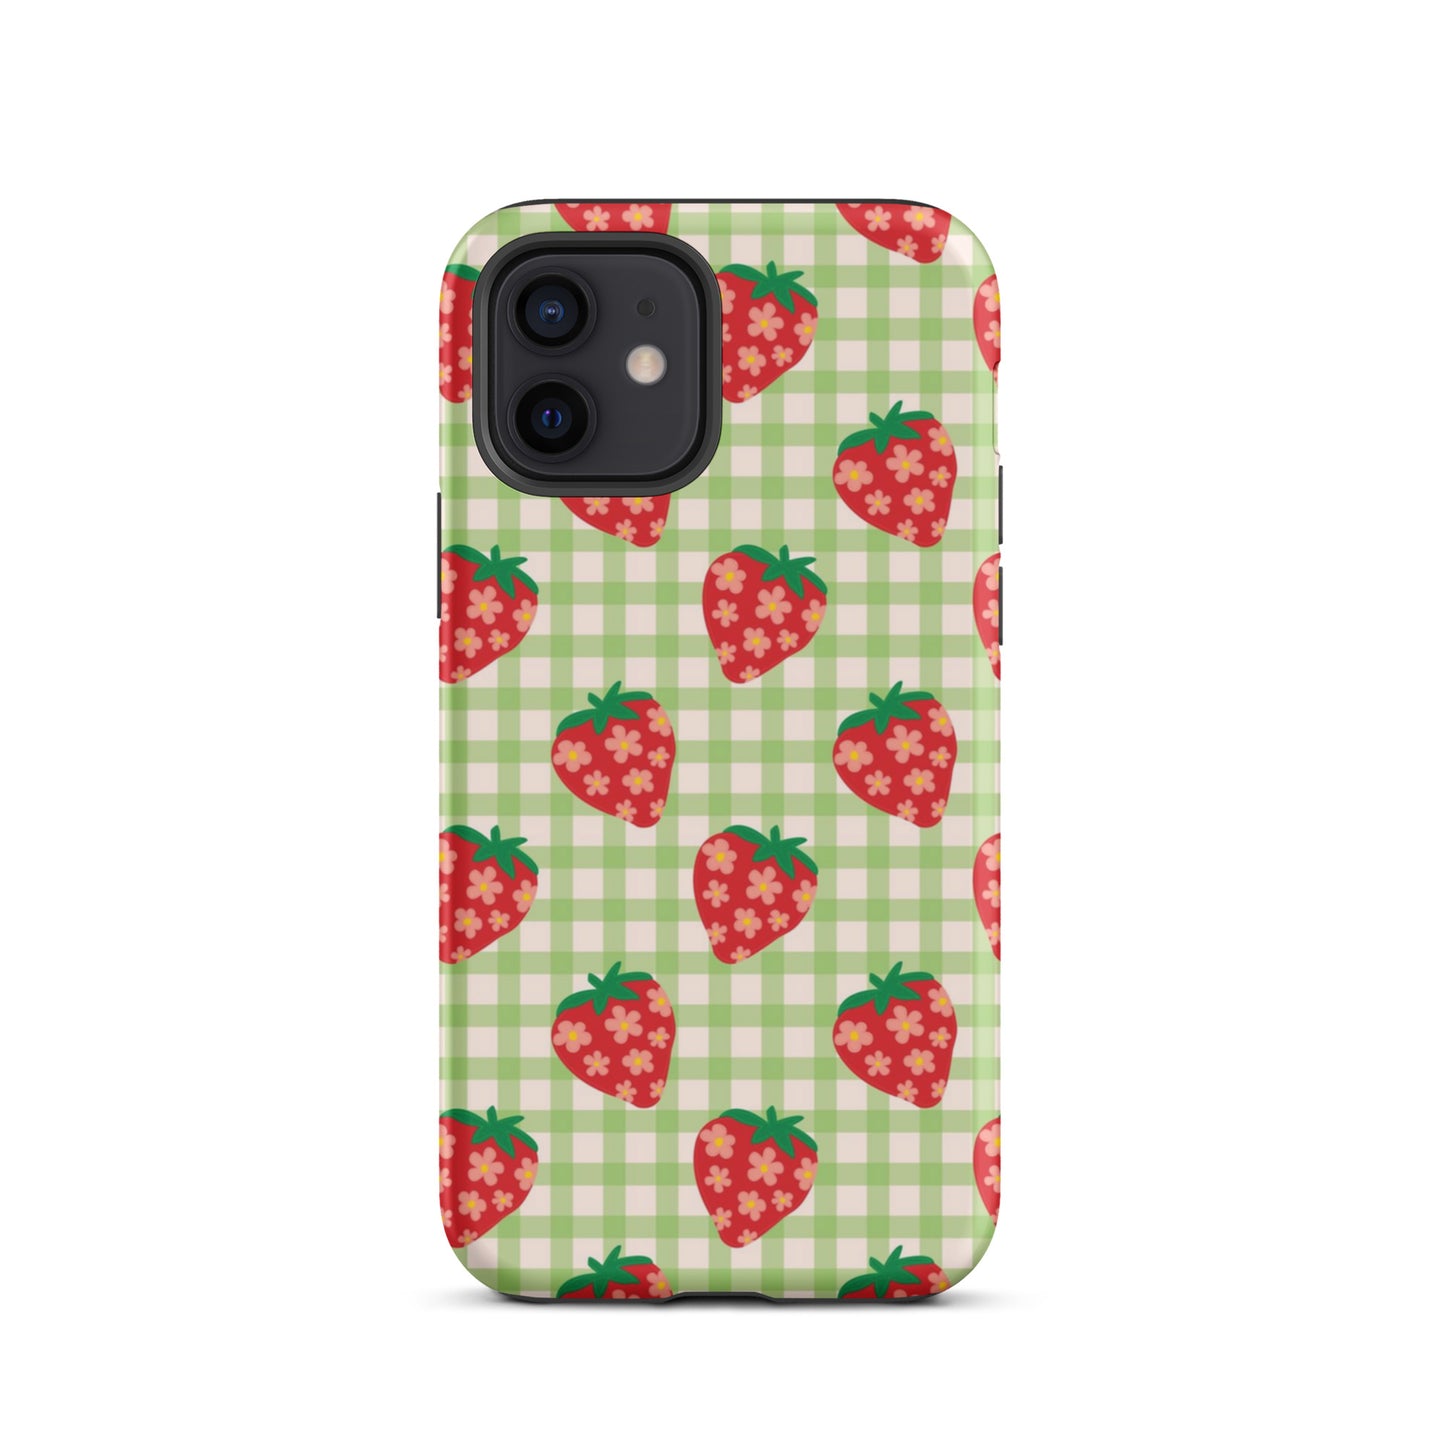 Strawberry Picnic iPhone Case iPhone 12 Matte